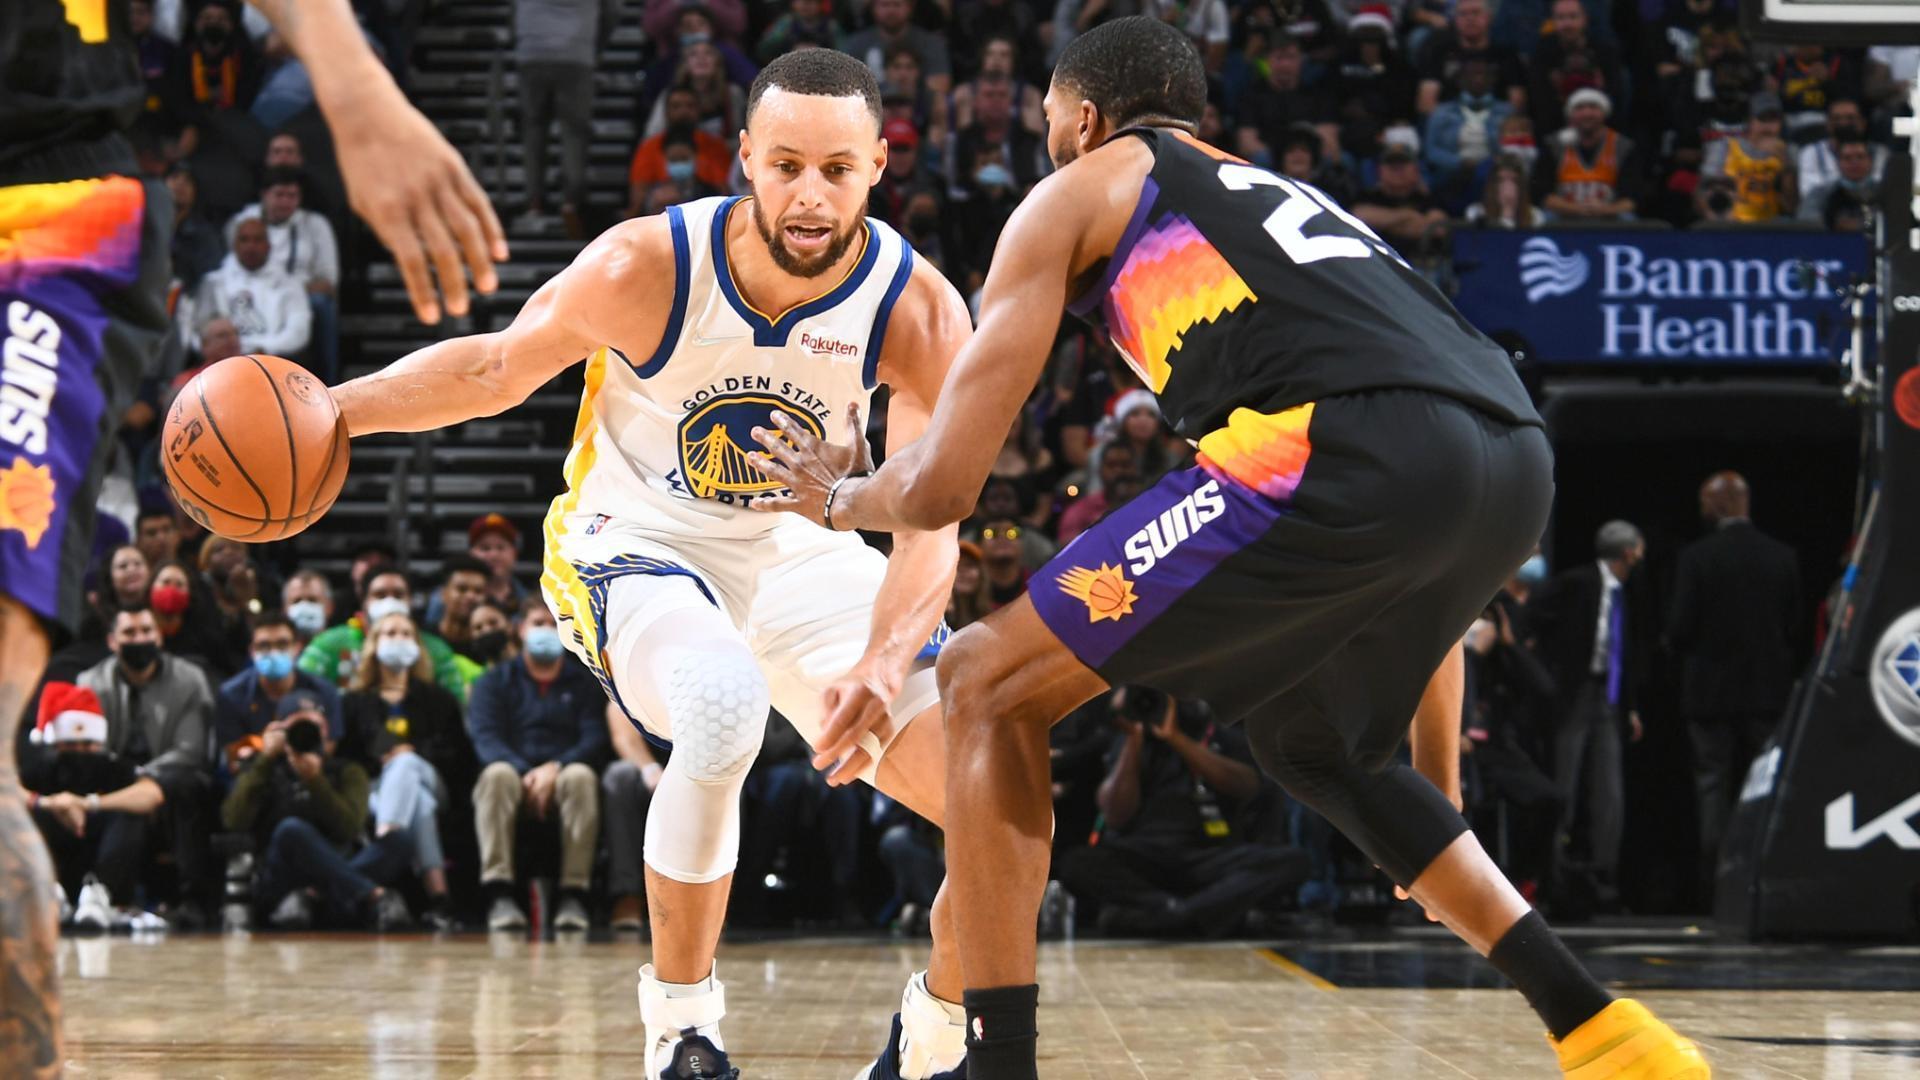 Steph hangs 33 points on Suns in Christmas Day win